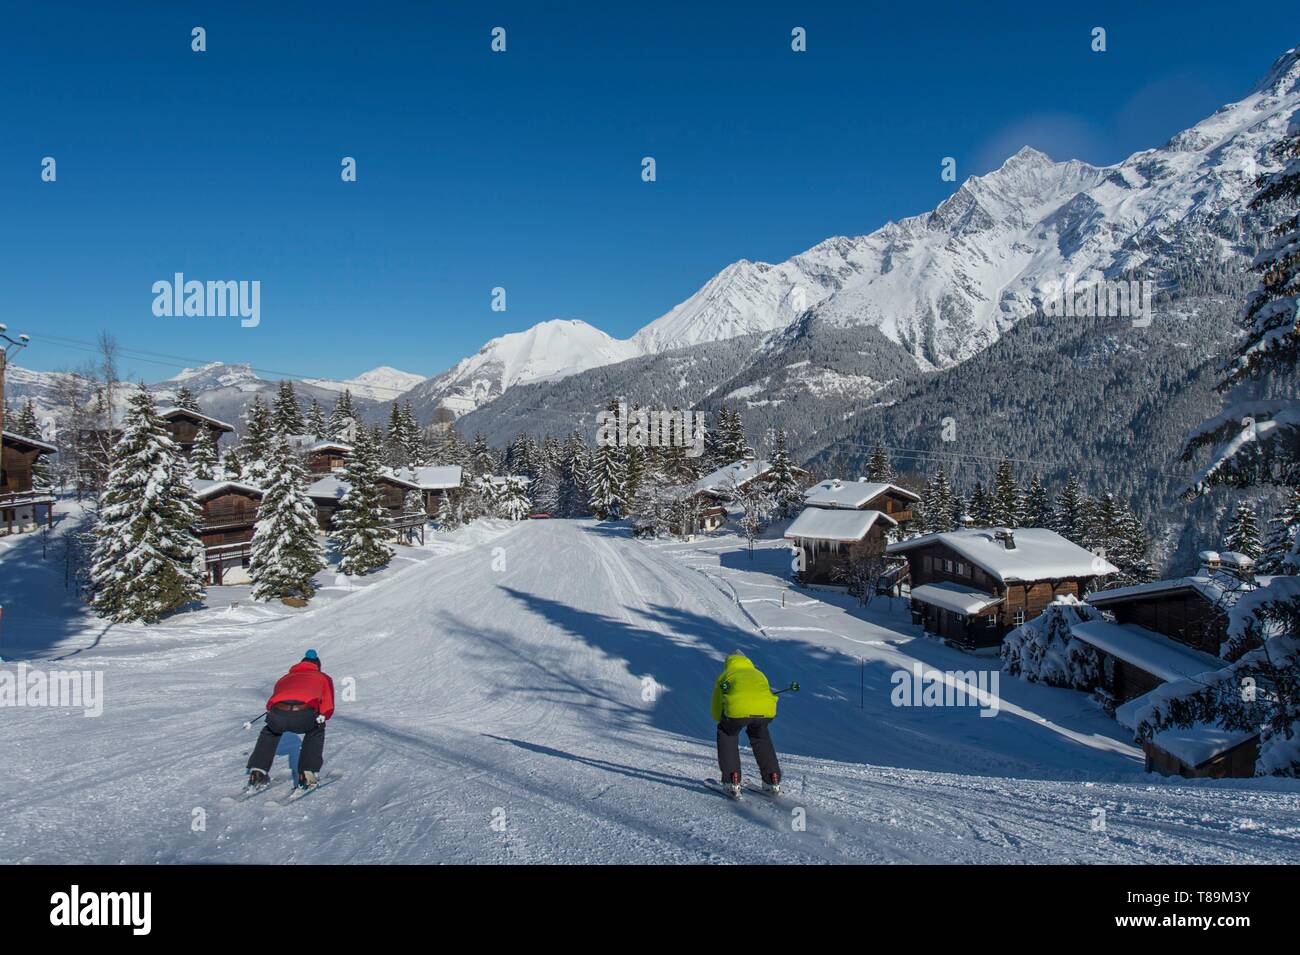 France, Haute Savoie, Massif of the Mont Blanc, the Contamines Montjoie, the short ski method on the ski slopes, 2 skiers in schuss position in the middle of chalets Stock Photo